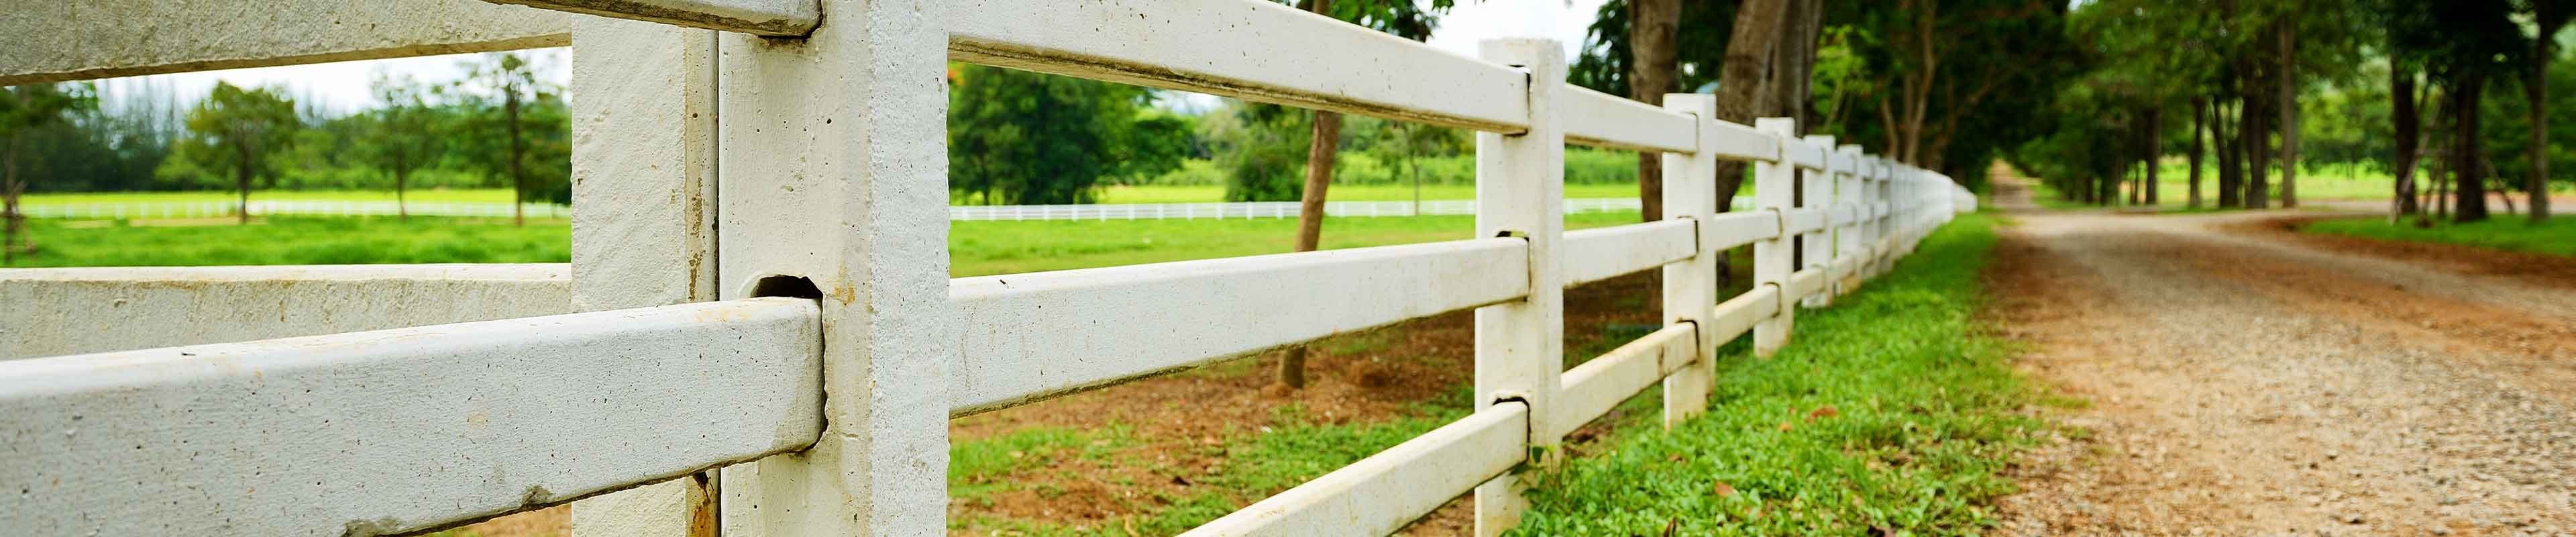 A fence marking the edge of a homeowner's property.